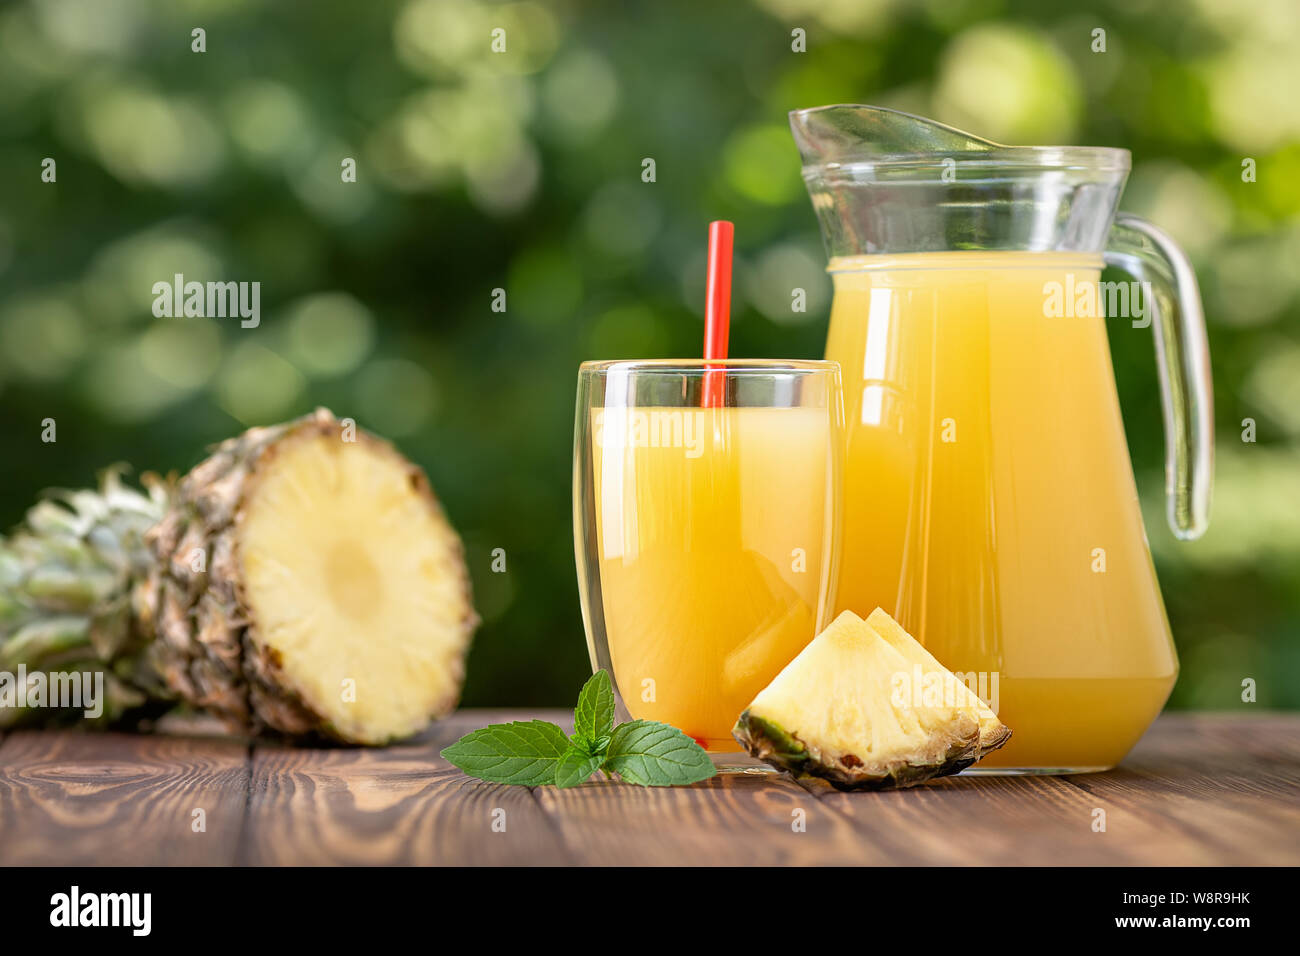 https://c8.alamy.com/comp/W8R9HK/fresh-pineapple-juice-in-double-sided-wall-glass-and-jug-with-ripe-fruit-on-wooden-table-outdoors-summer-refreshing-drink-W8R9HK.jpg